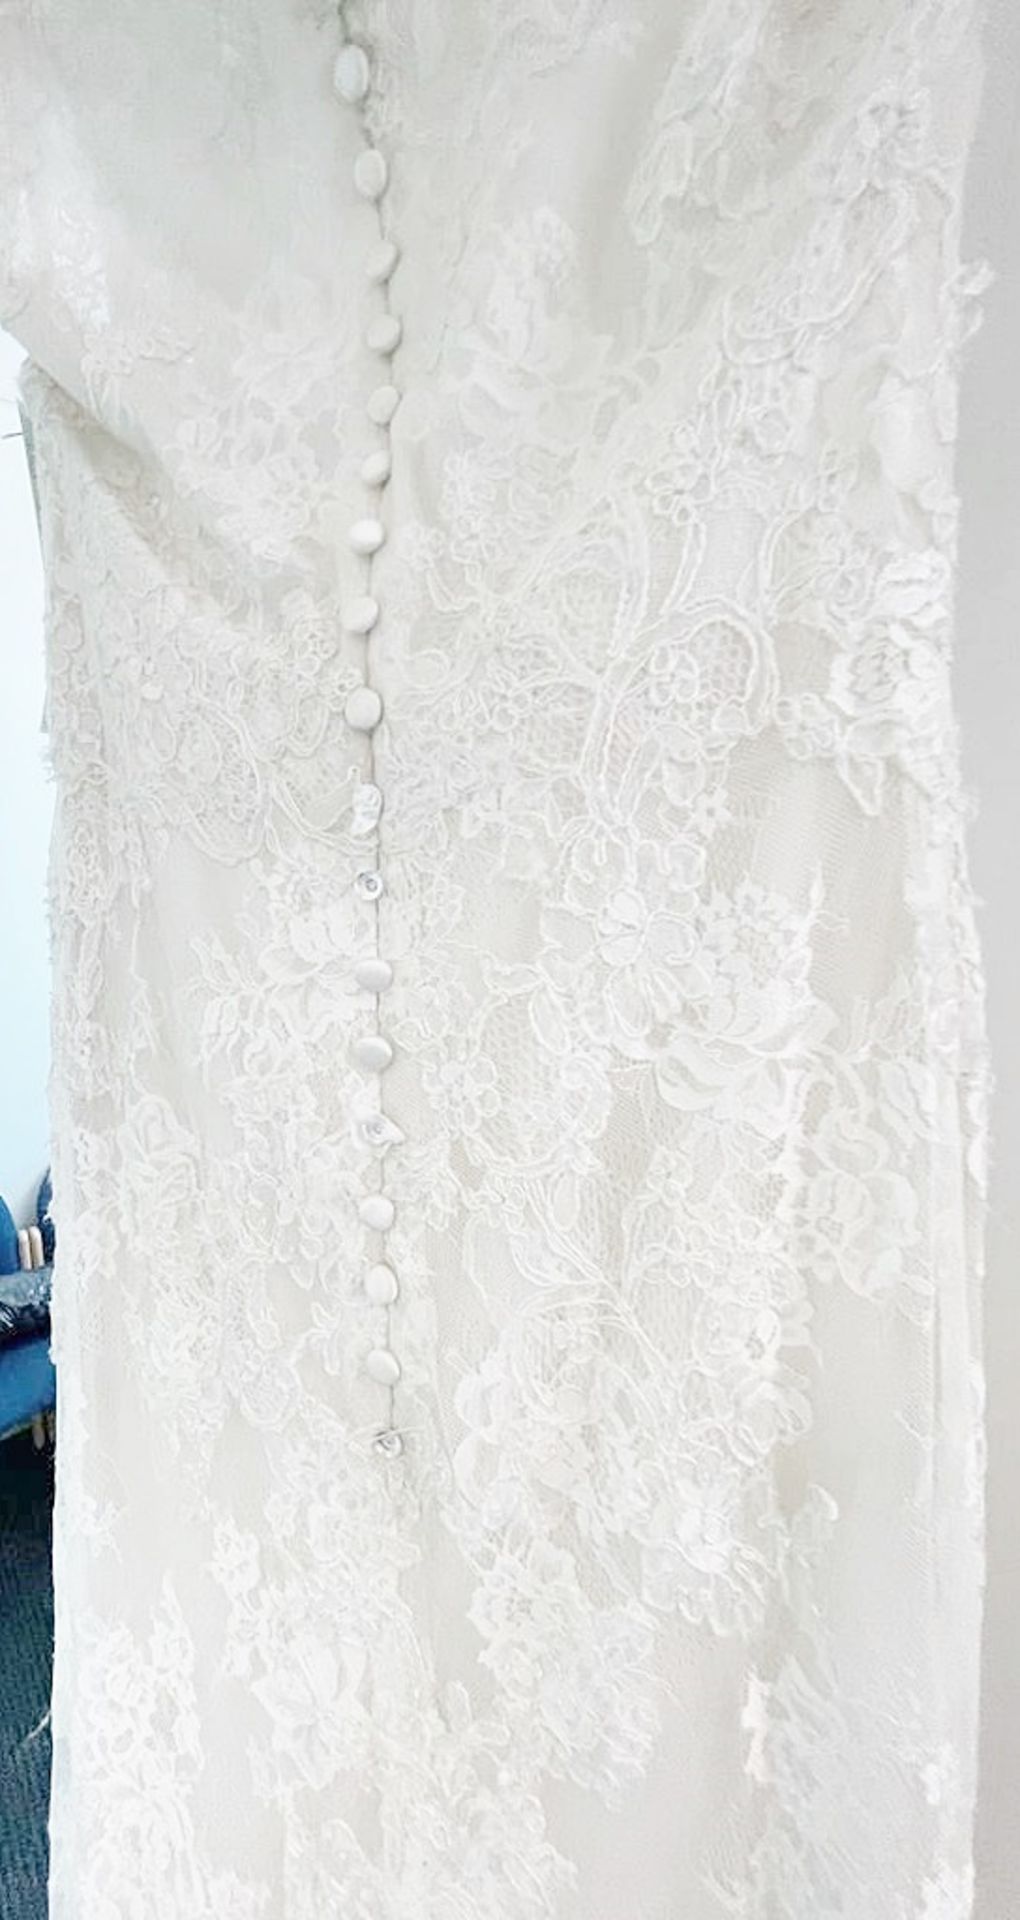 1 x LUSAN MANDONGUS 'Tabia' Fishtail Designer Wedding Dress Bridal Gown, With Chantilly Lace - Image 6 of 15